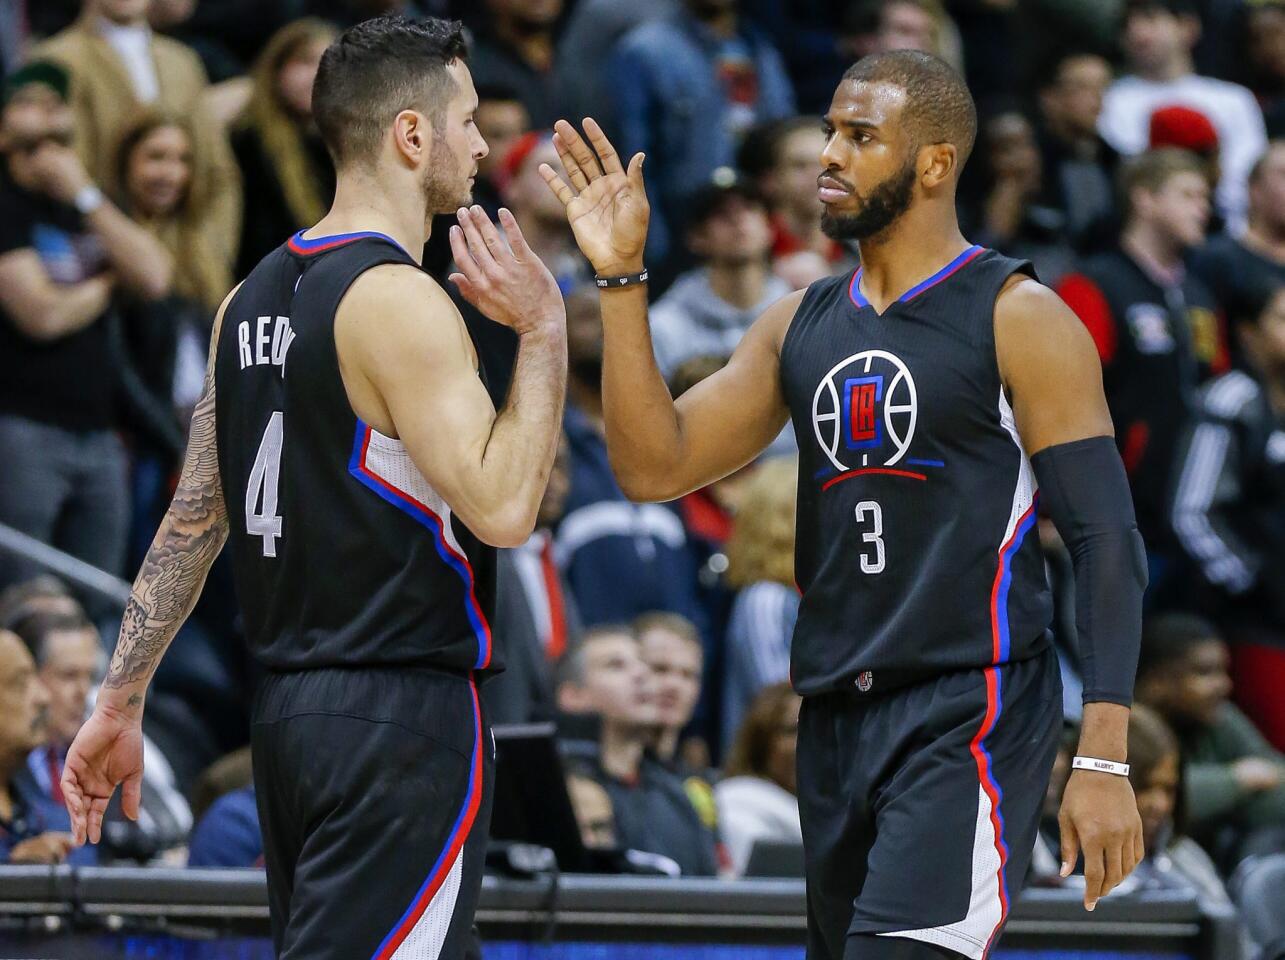 Clippers force 23 turnovers to beat Hawks, 85-83